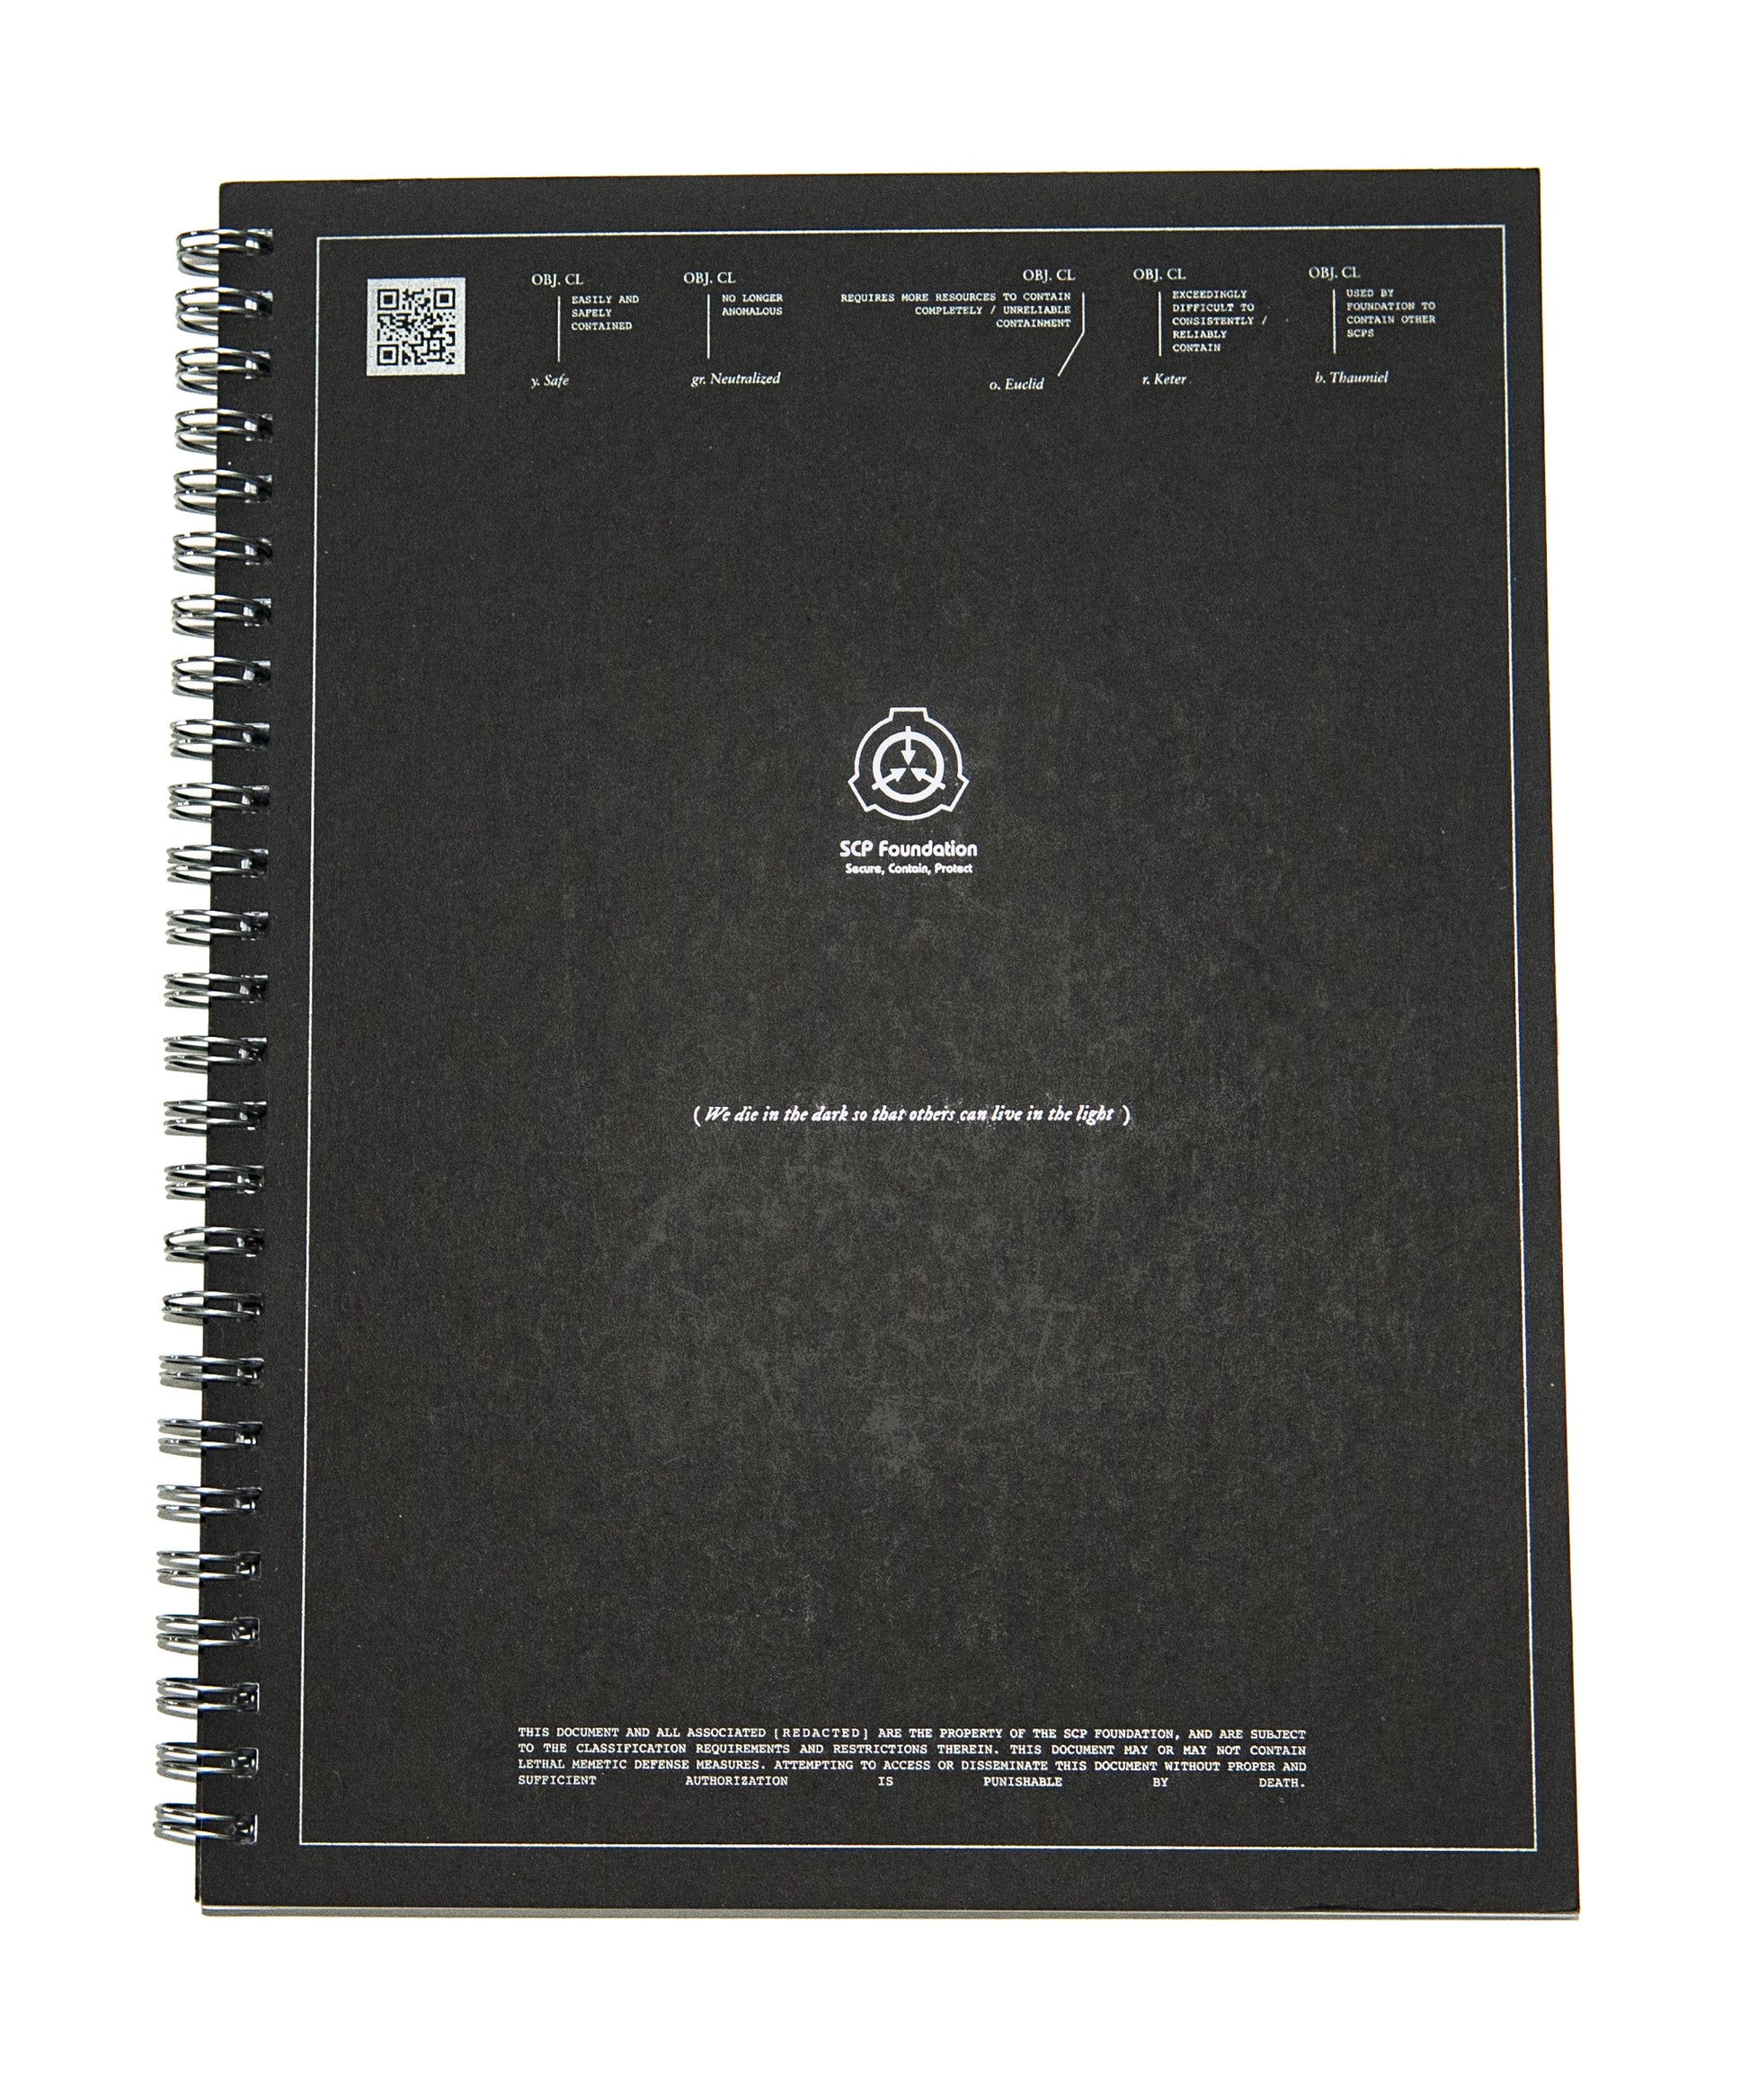 SCP Foundation Notebook - College-ruled notebook for scp foundation fans -  6x9 inches - 120 pages: Secure. Contain. Protect. - Foundation, Scp:  9781677202959 - AbeBooks